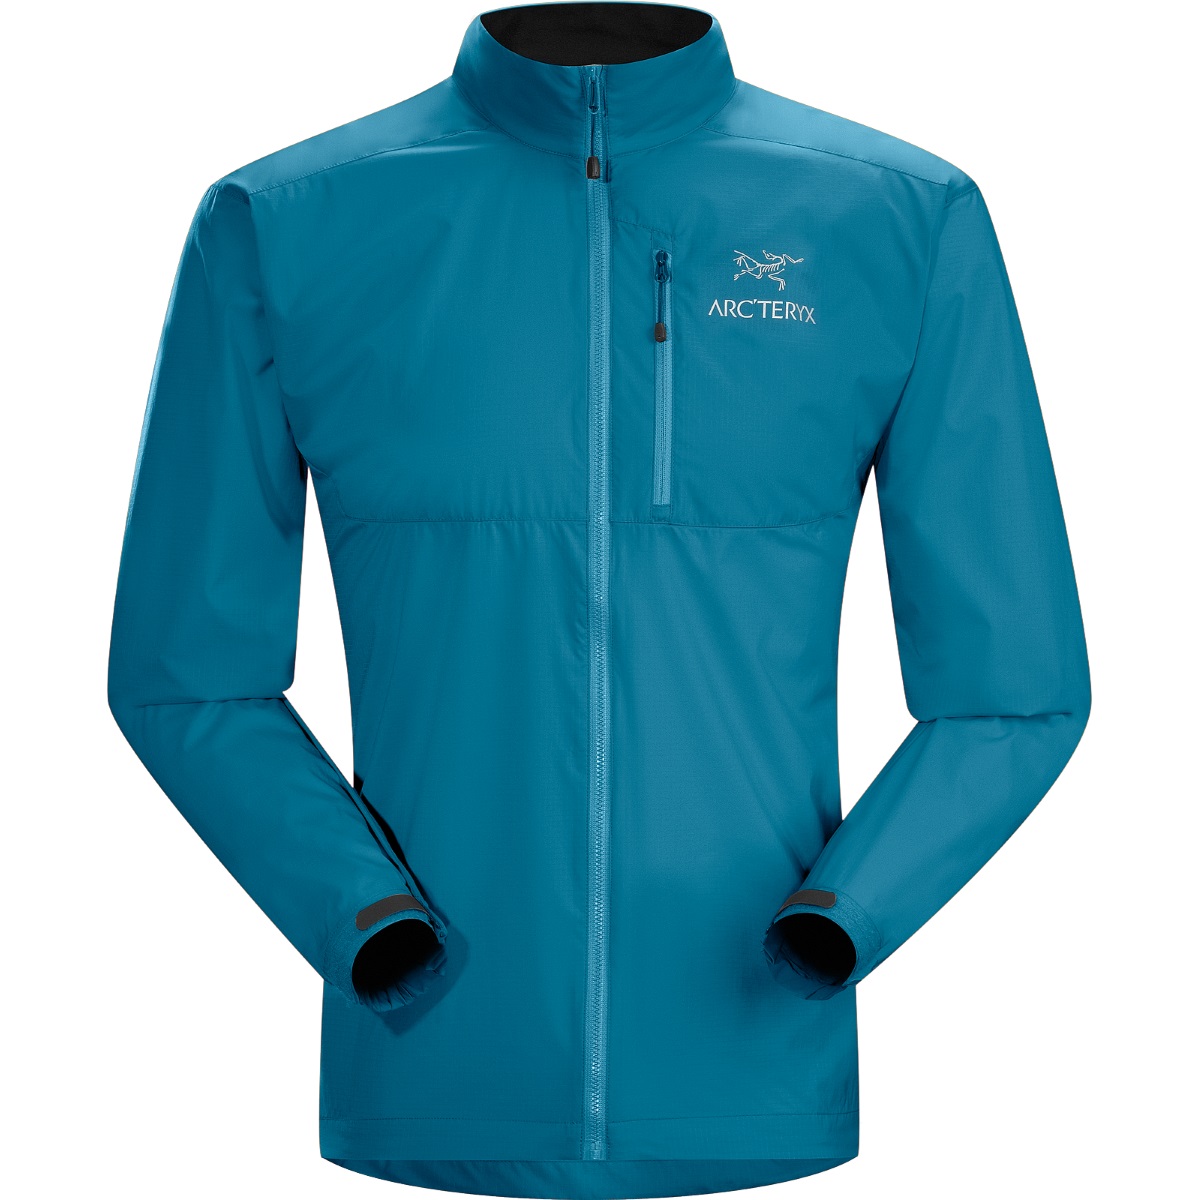 Arc'teryx Squamish Jacket, men's, discontinued colors (free ground ...